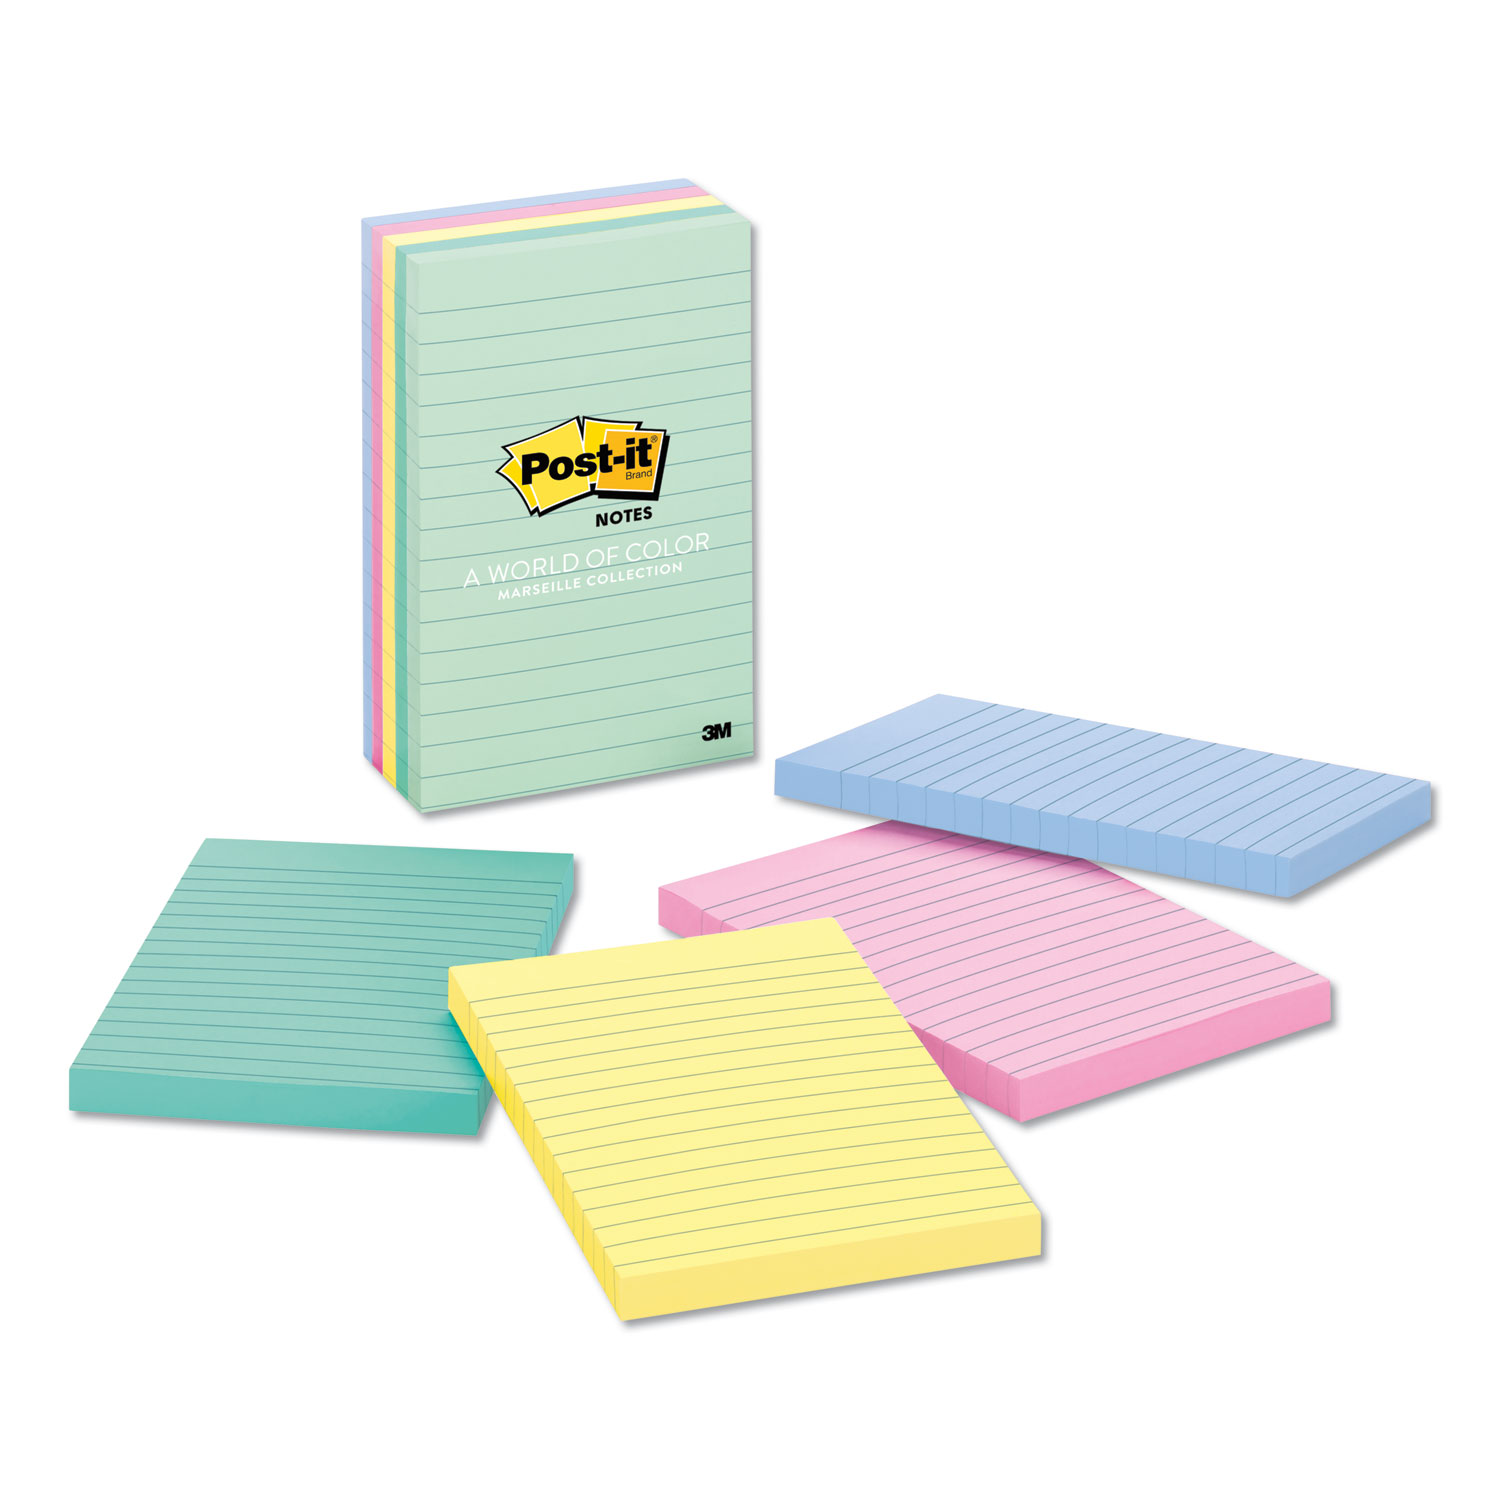  Post-it Notes 660-5PK-AST Original Pads in Marseille Colors, Lined, 4 x 6, 100-Sheet, 5/Pack (MMM6605PKAST) 